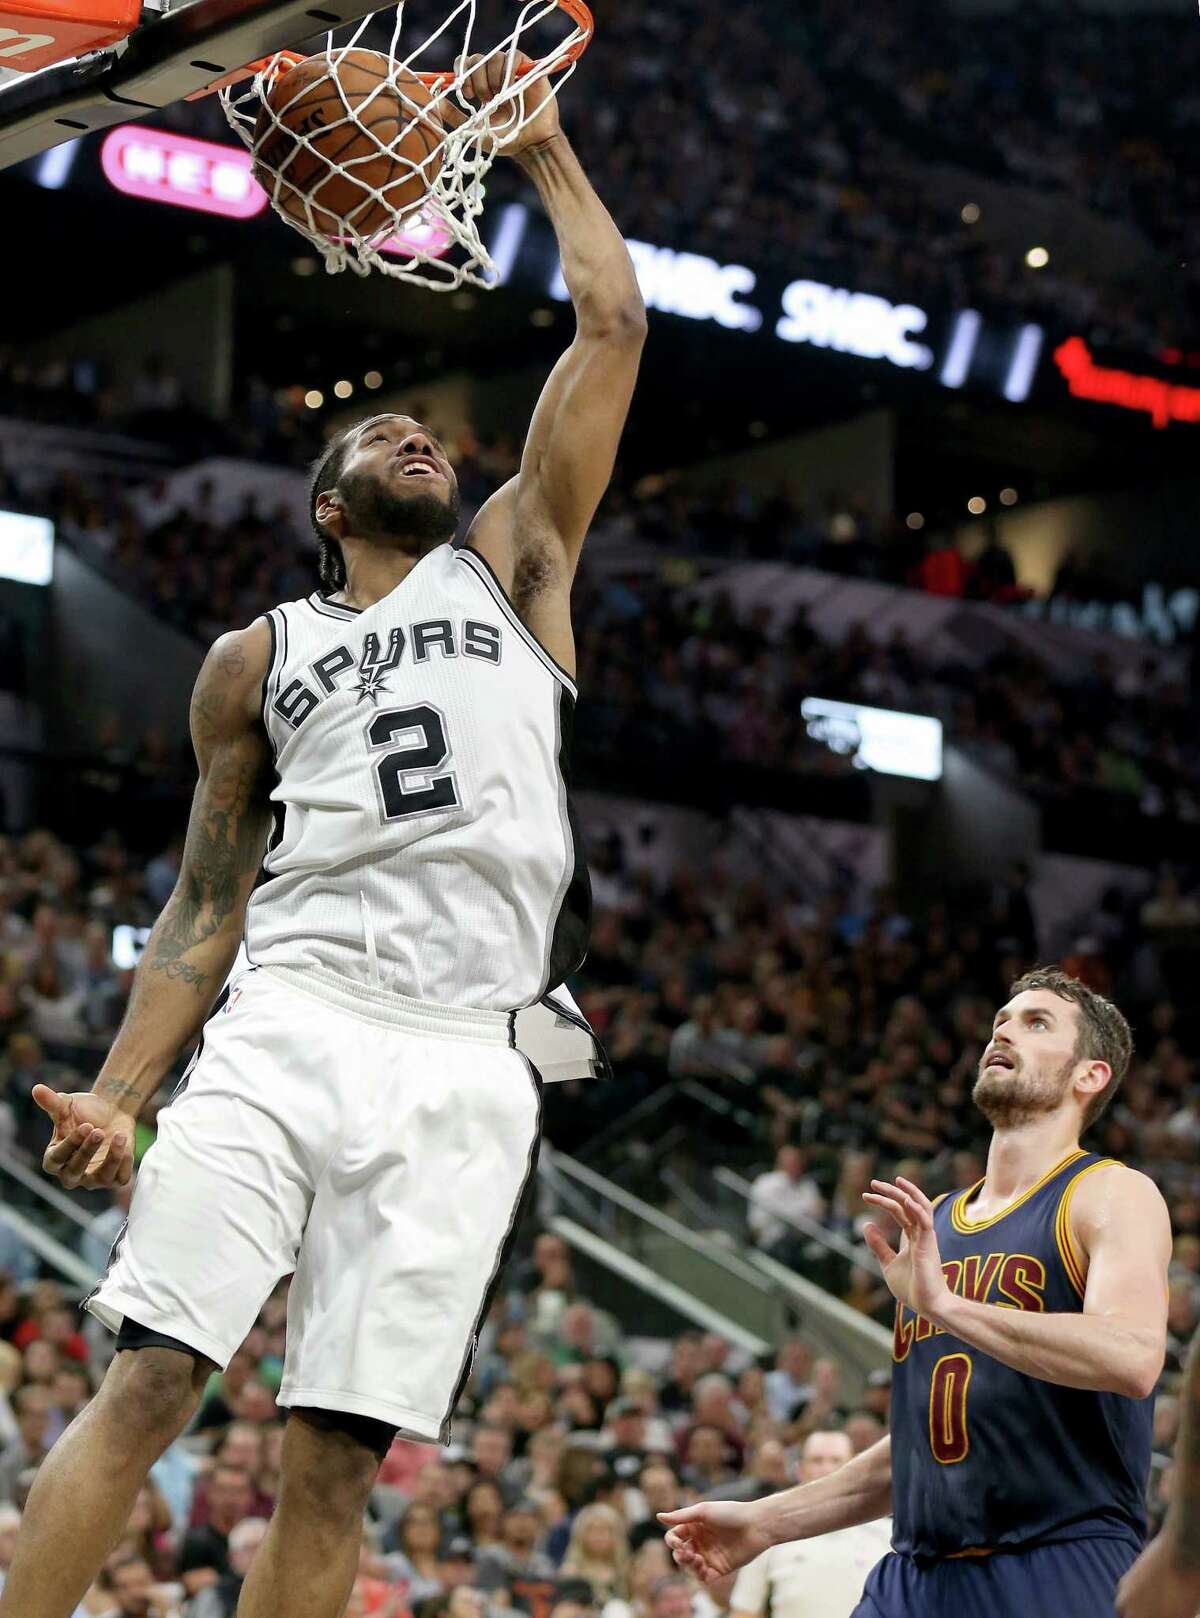 San Antonio Spurs' Kawhi Leonard dunks around Cleveland Cavaliers' Kevin Love during first half action Monday March 27, 2017 at the AT&T Center.